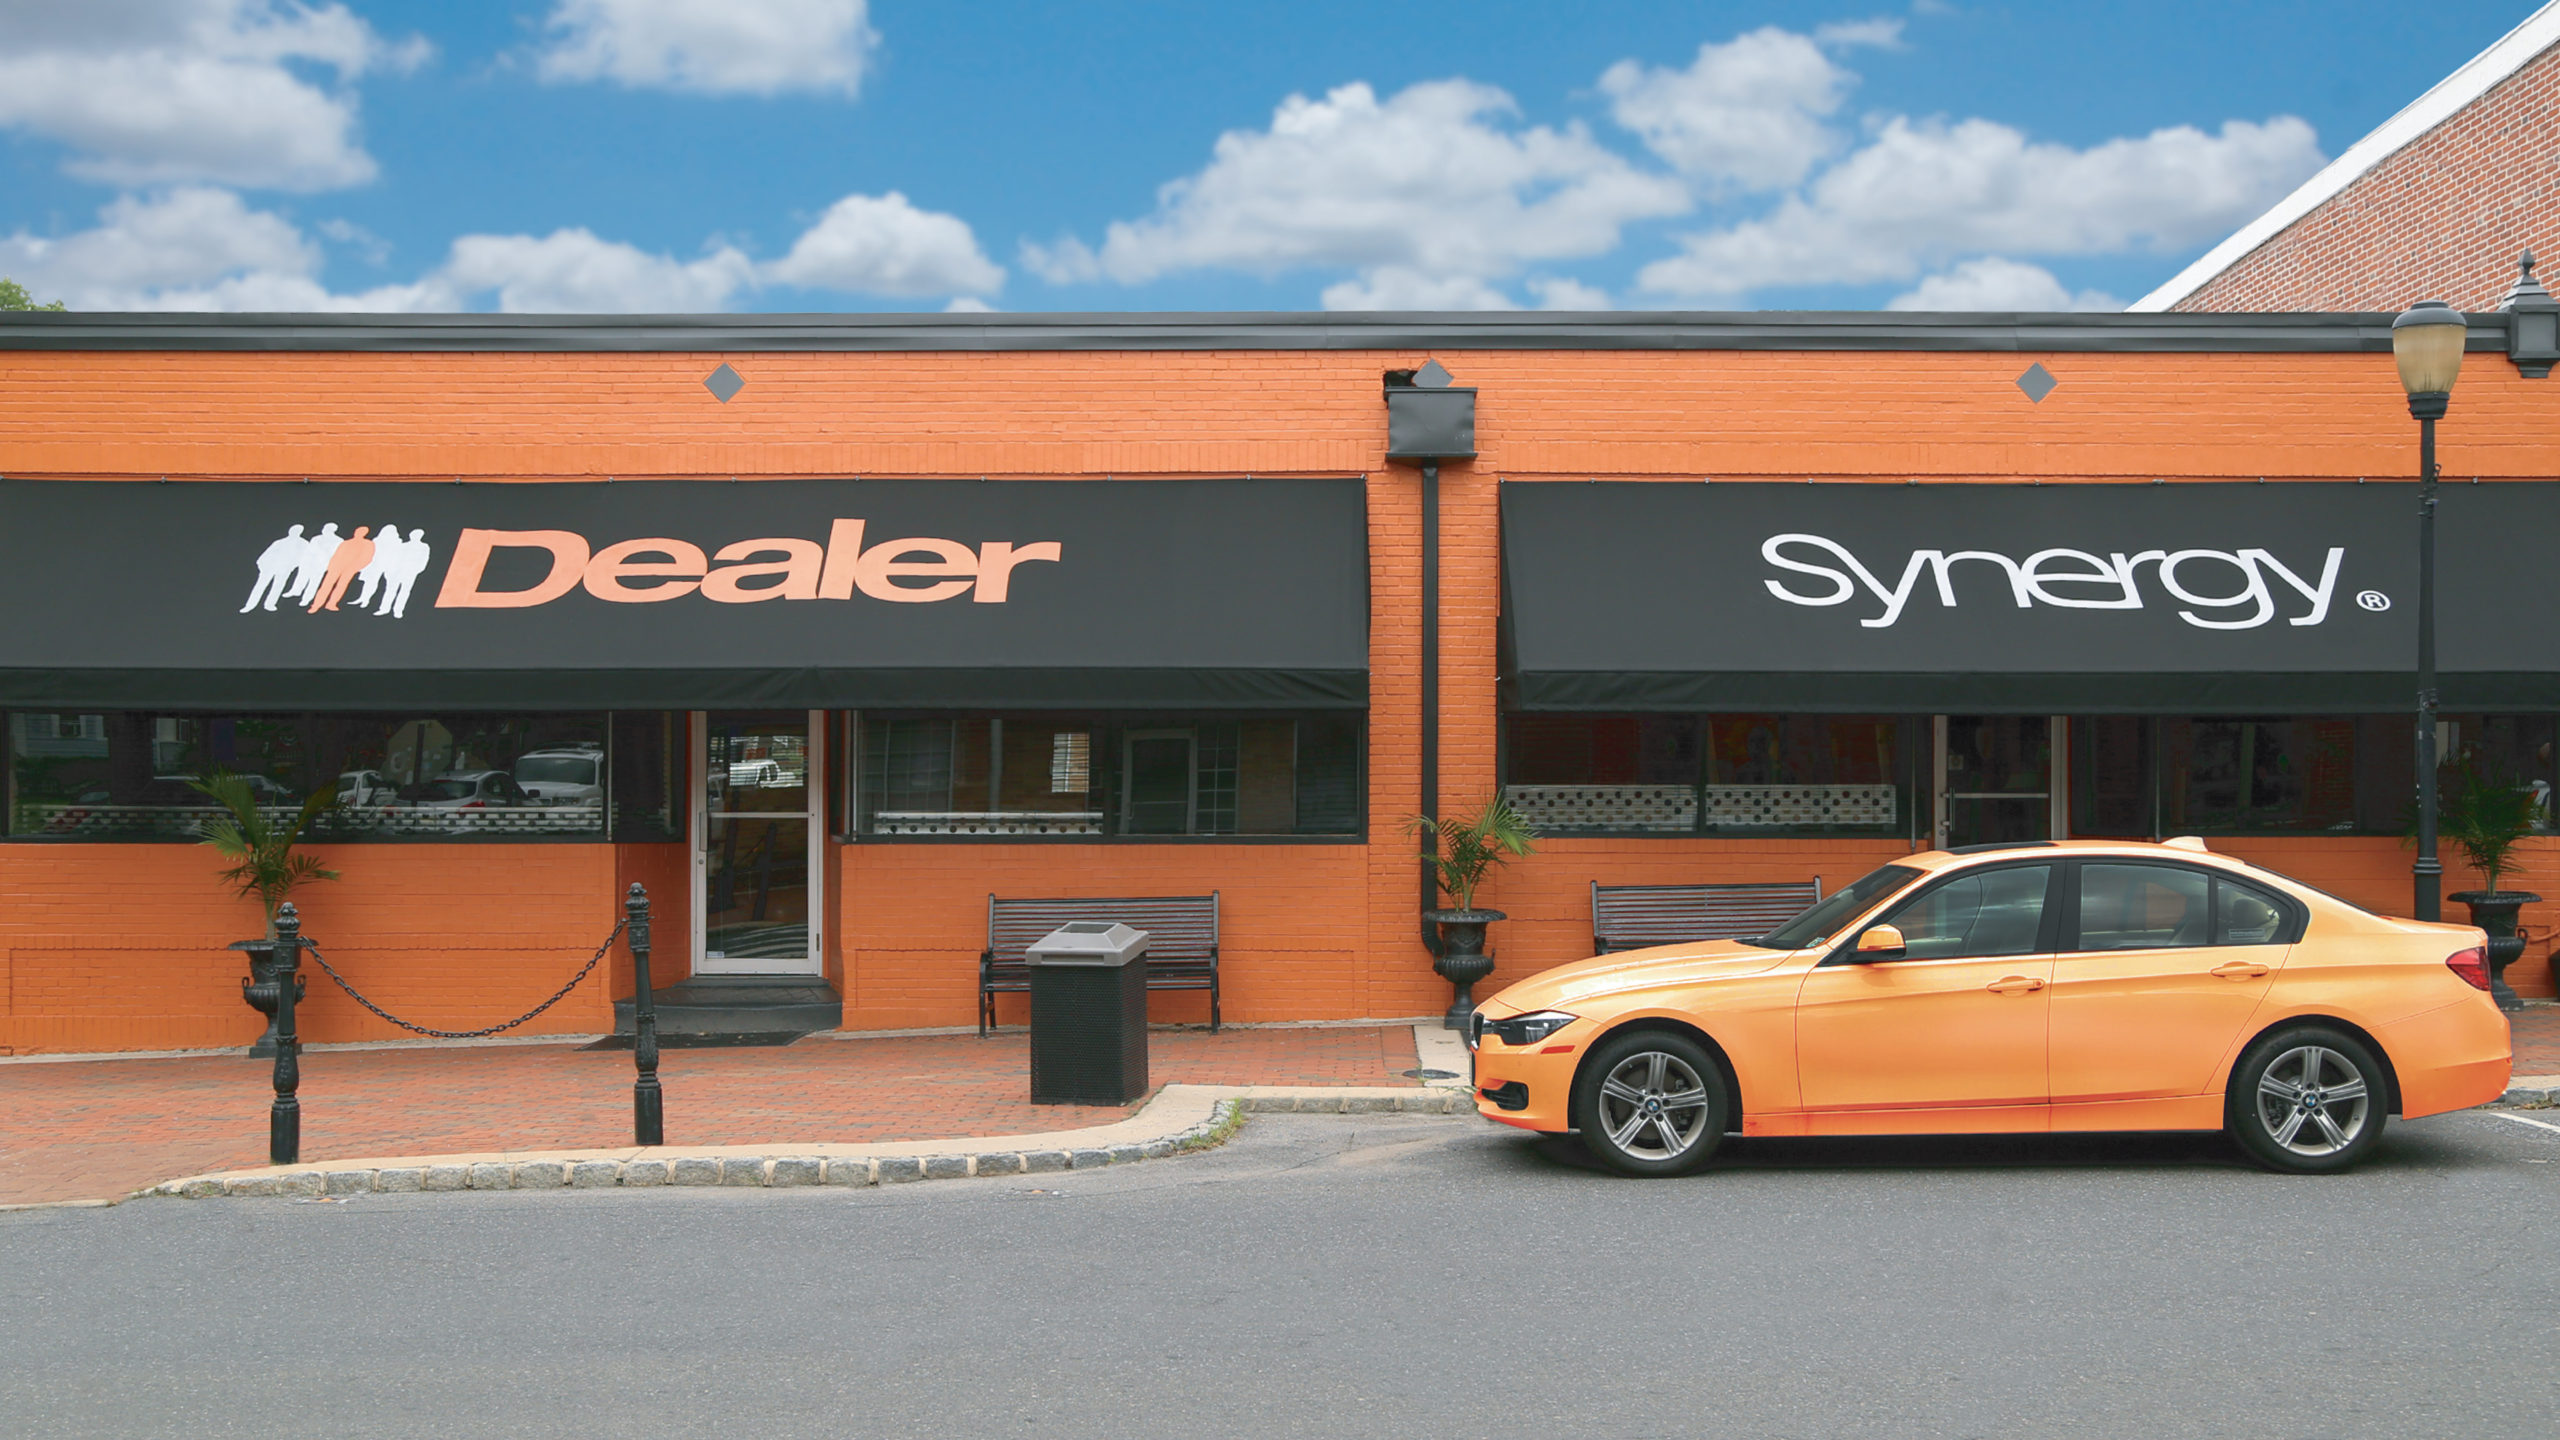 Dealer Synergy building specializing in Automotive Sales Training and Internet Sales.